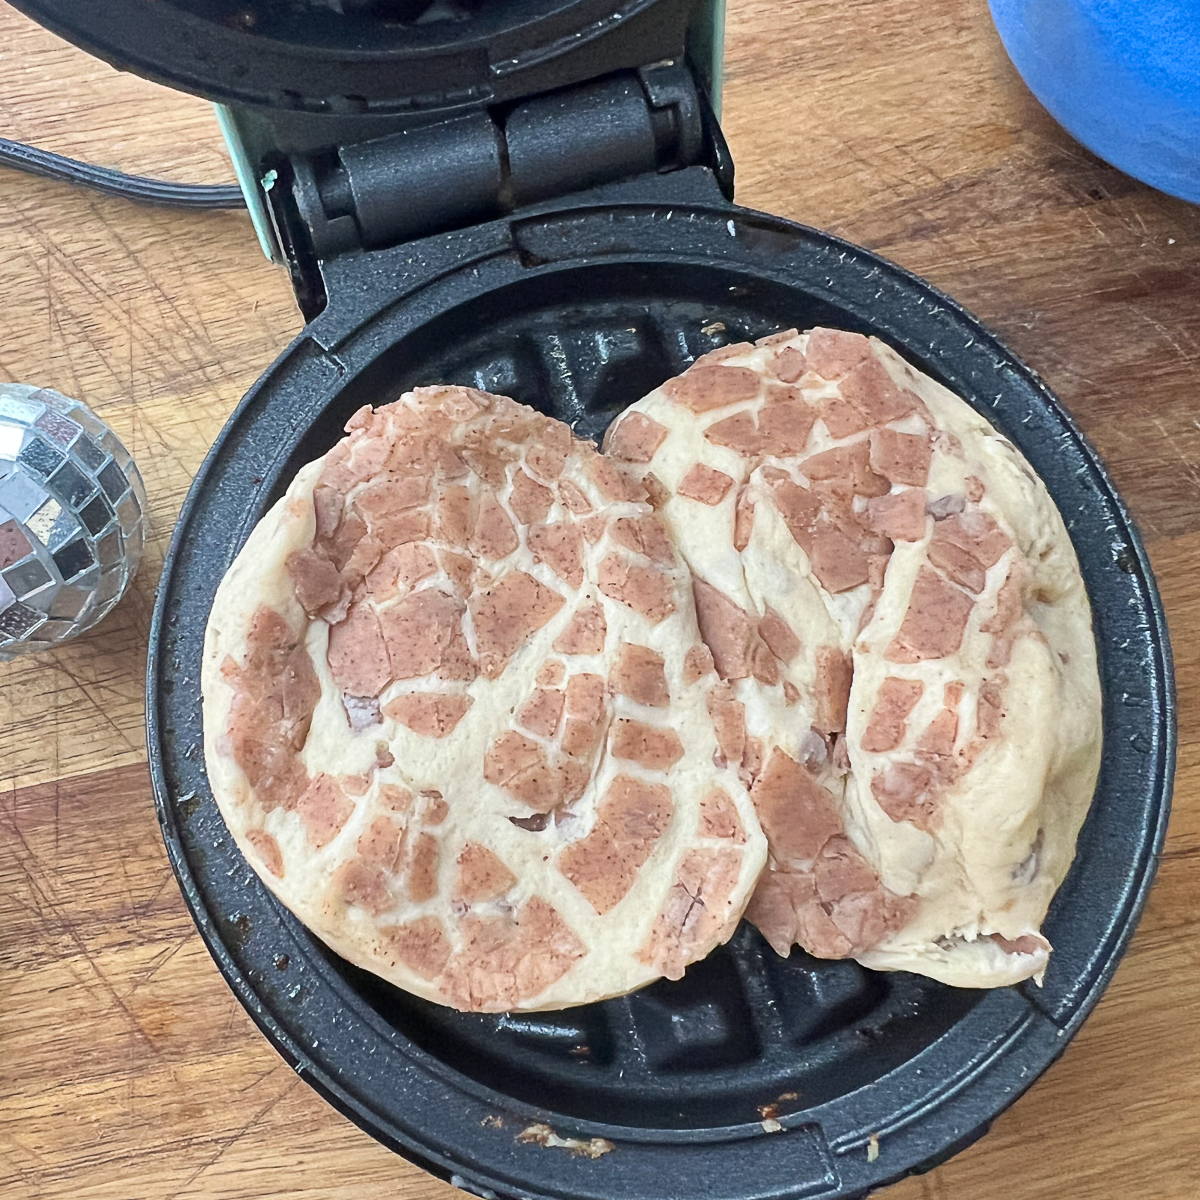 Two waffles on the dash mini waffle maker